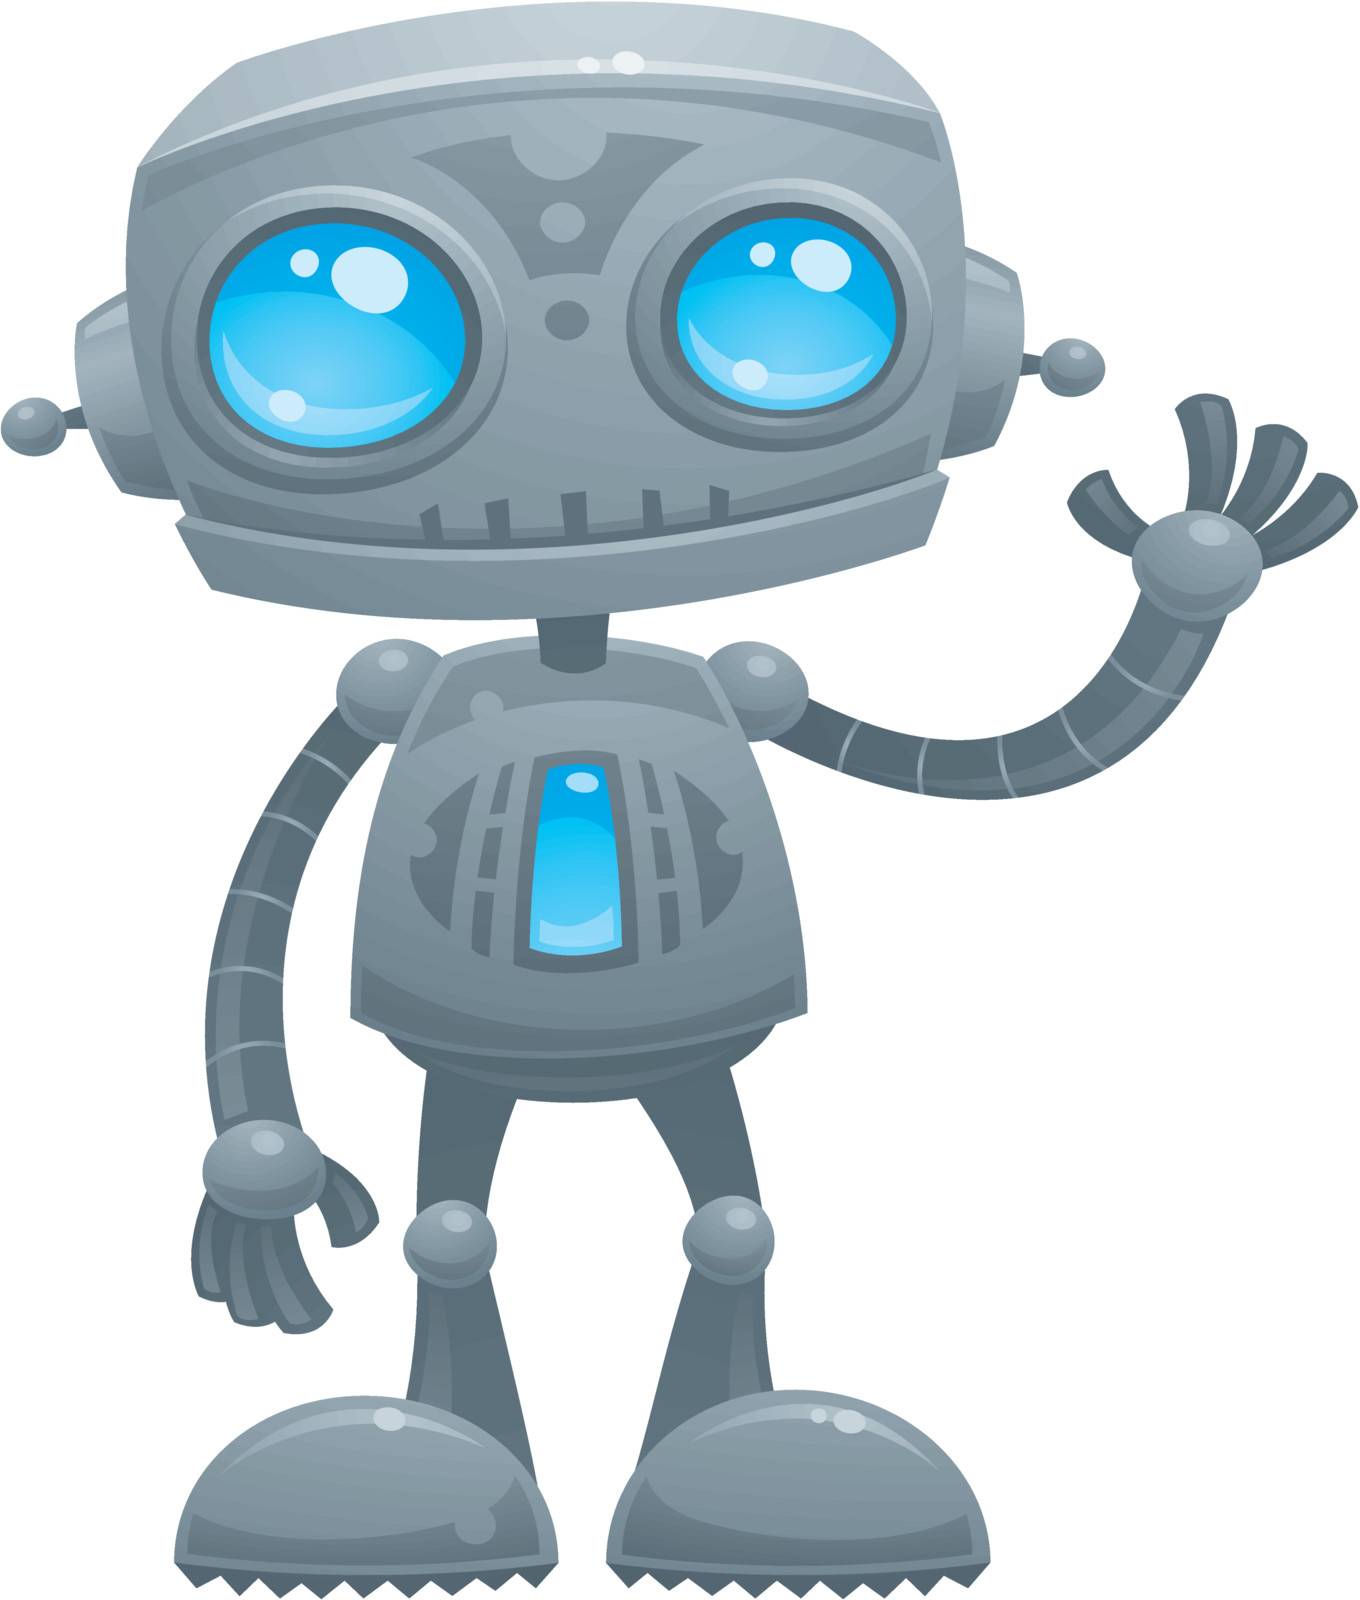 Vector cartoon illustration of a cute and friendly robot with blue eyes waving hello.